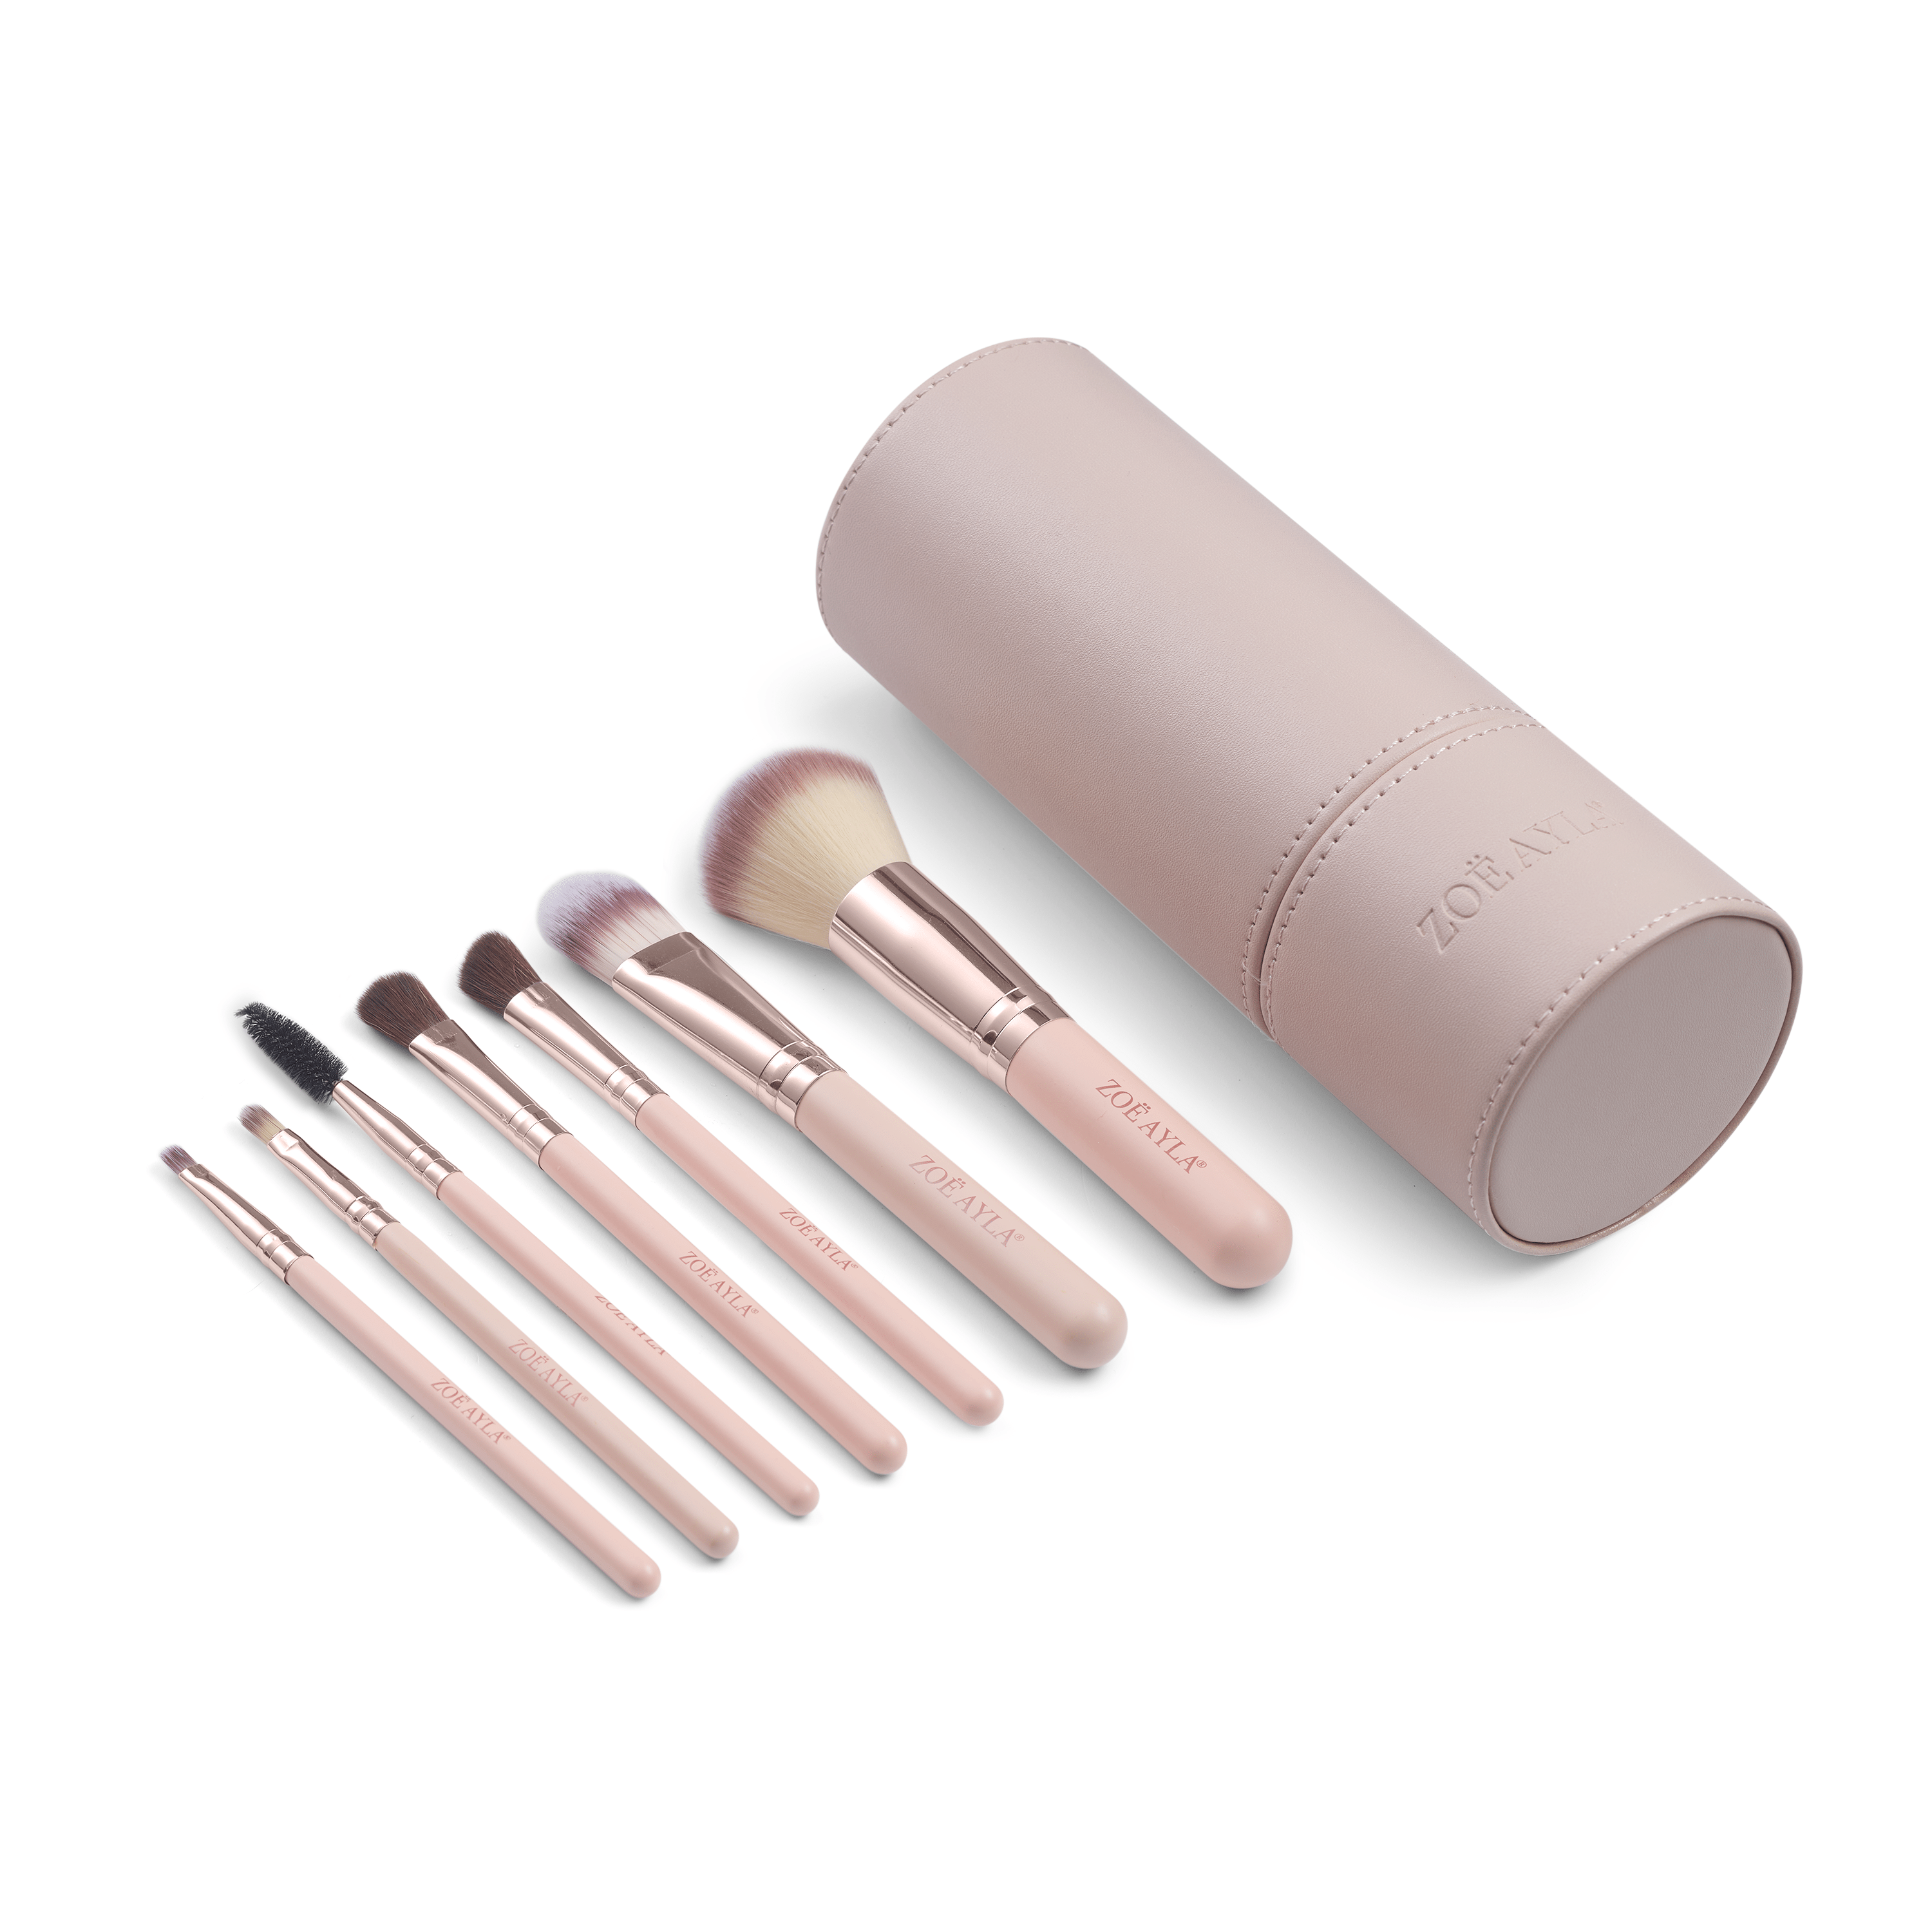 7-Piece Makeup Brush Set with Cylindric Case